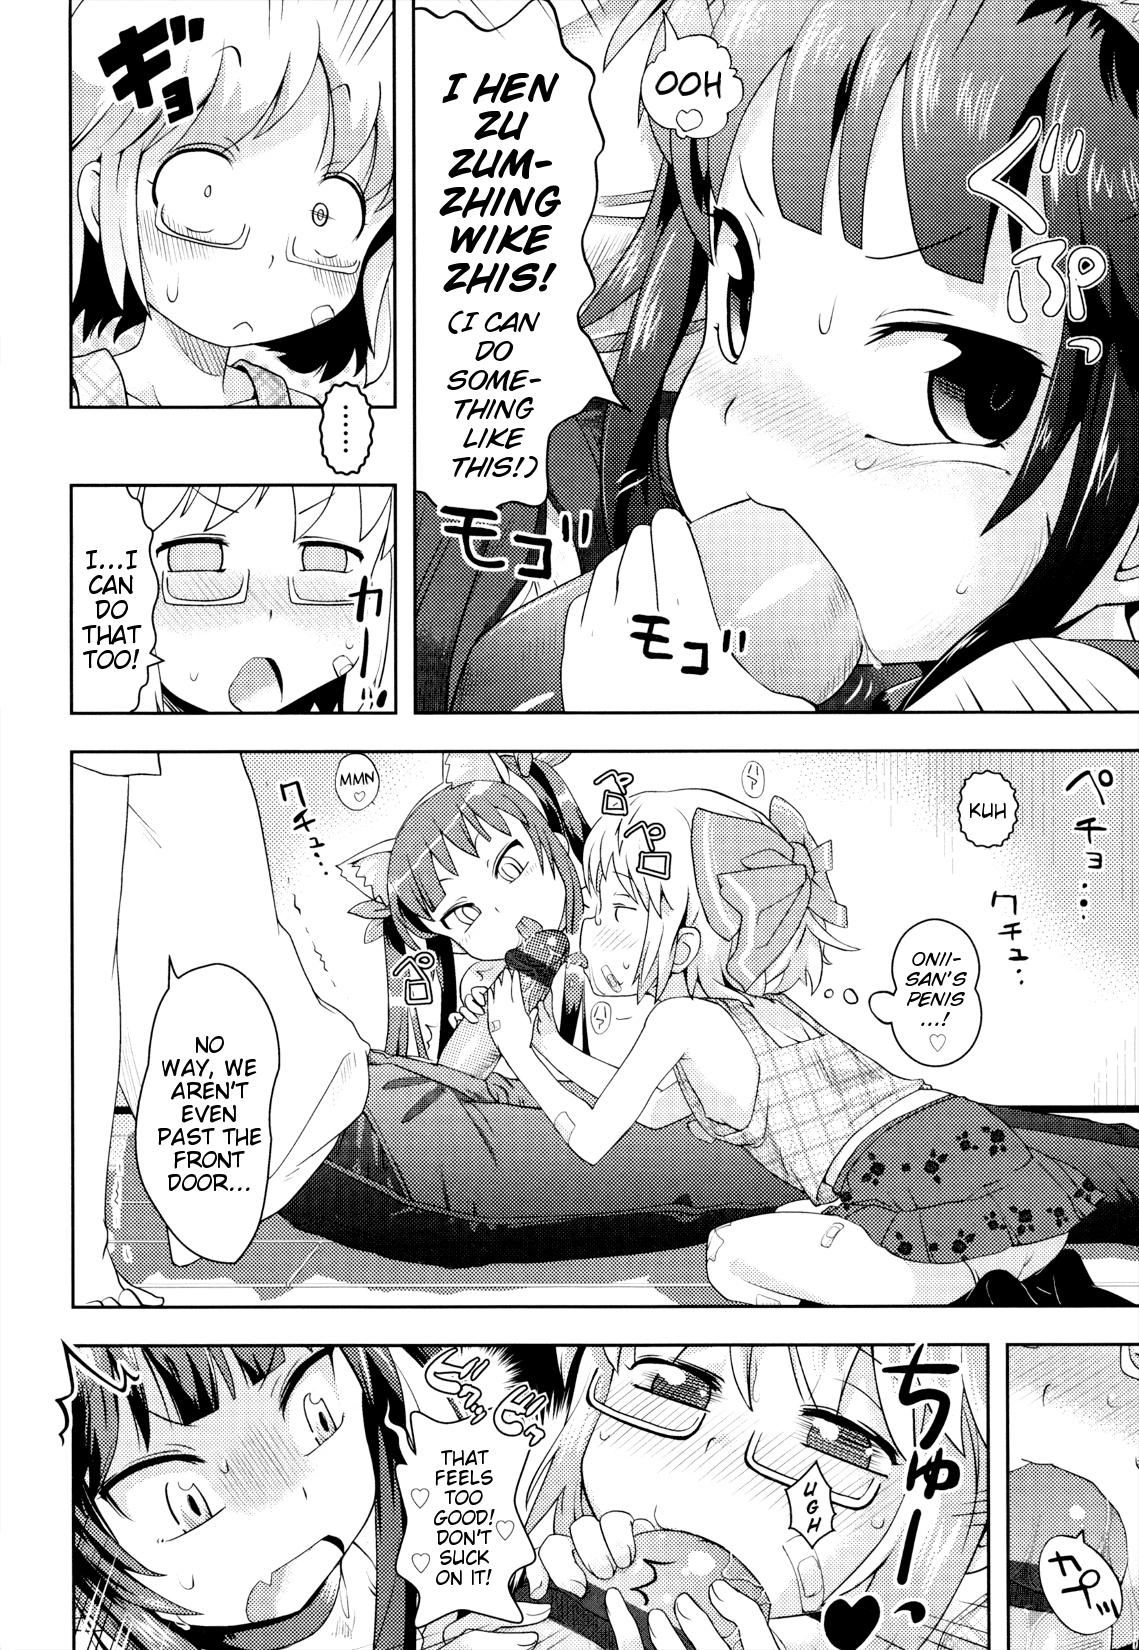 Titties Gaw-Gaw! Imouto Security Fist - Page 8